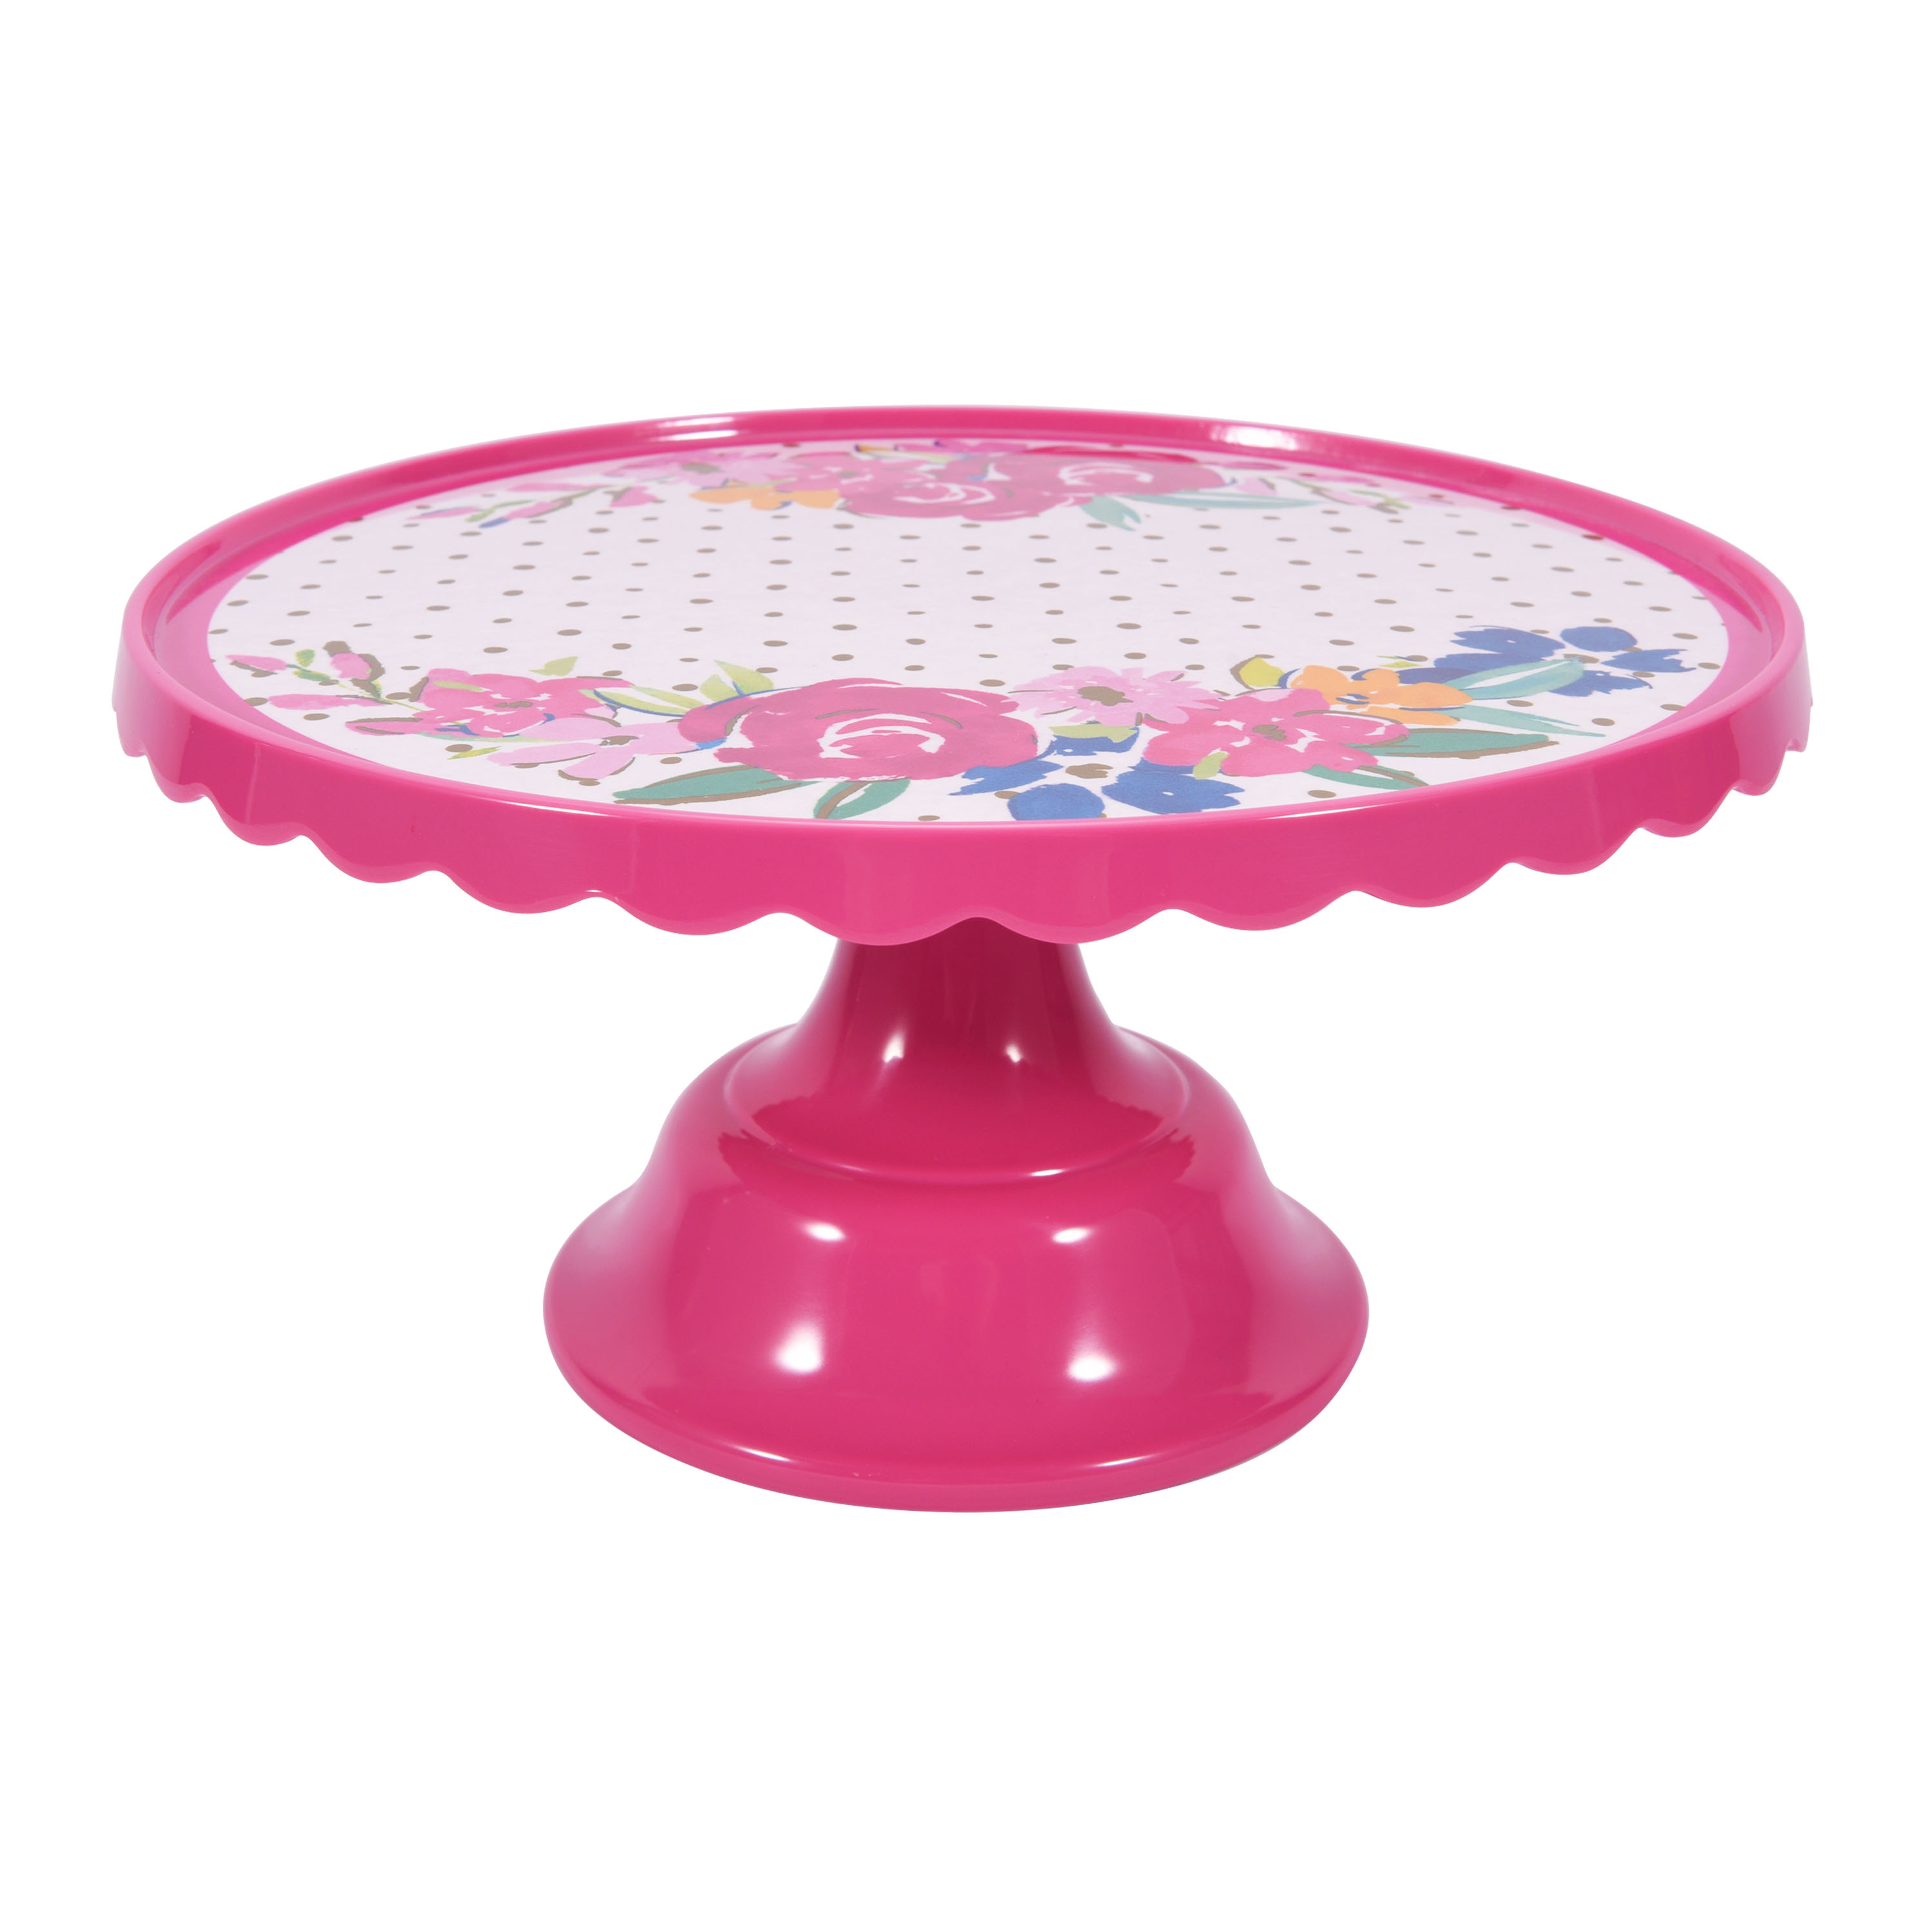 The Pioneer Woman 11-inch Cake Stand Assortment - image 1 of 4